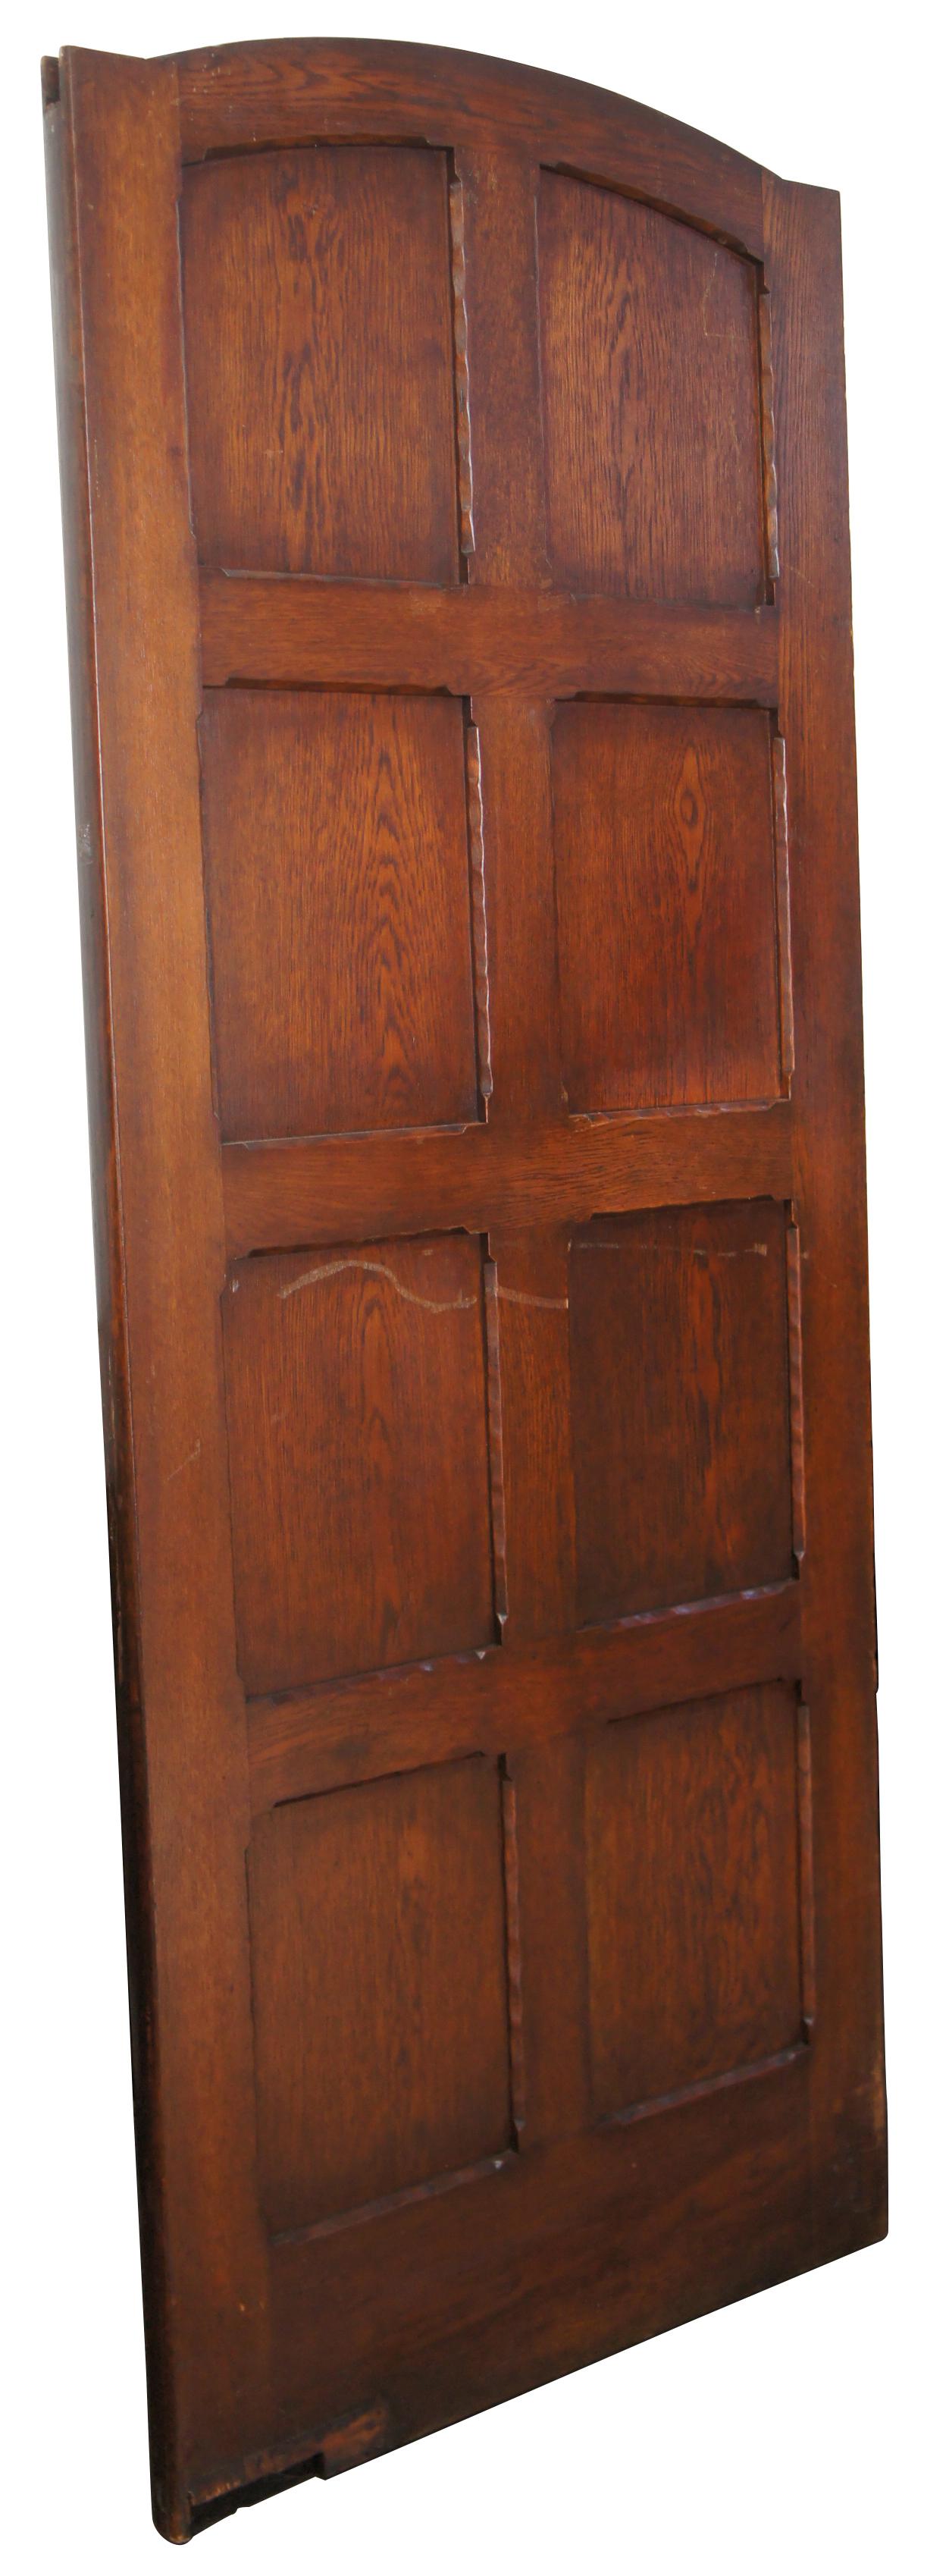 Early 20th century oak reclaimed swinging butler or kitchen door. Features eight panels in a grid pattern with Spanish Revival design and hardware along one side. Comes from one of the first homes built in oakwood, Ohio by Harry I Schenck, circa